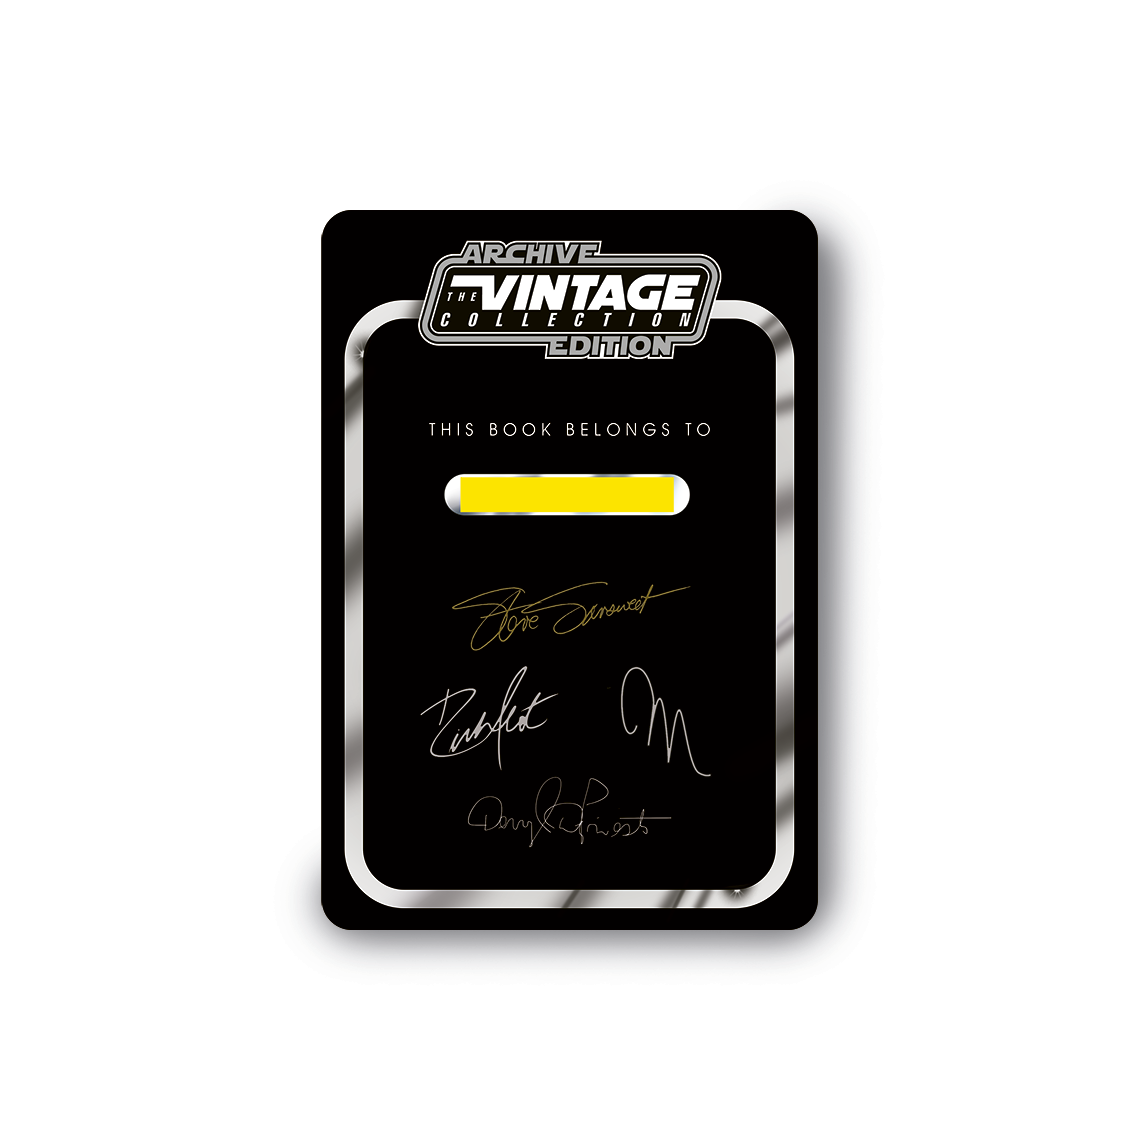 Signed Book Nameplate for Star Wars: The Vintage Collection Archive Book